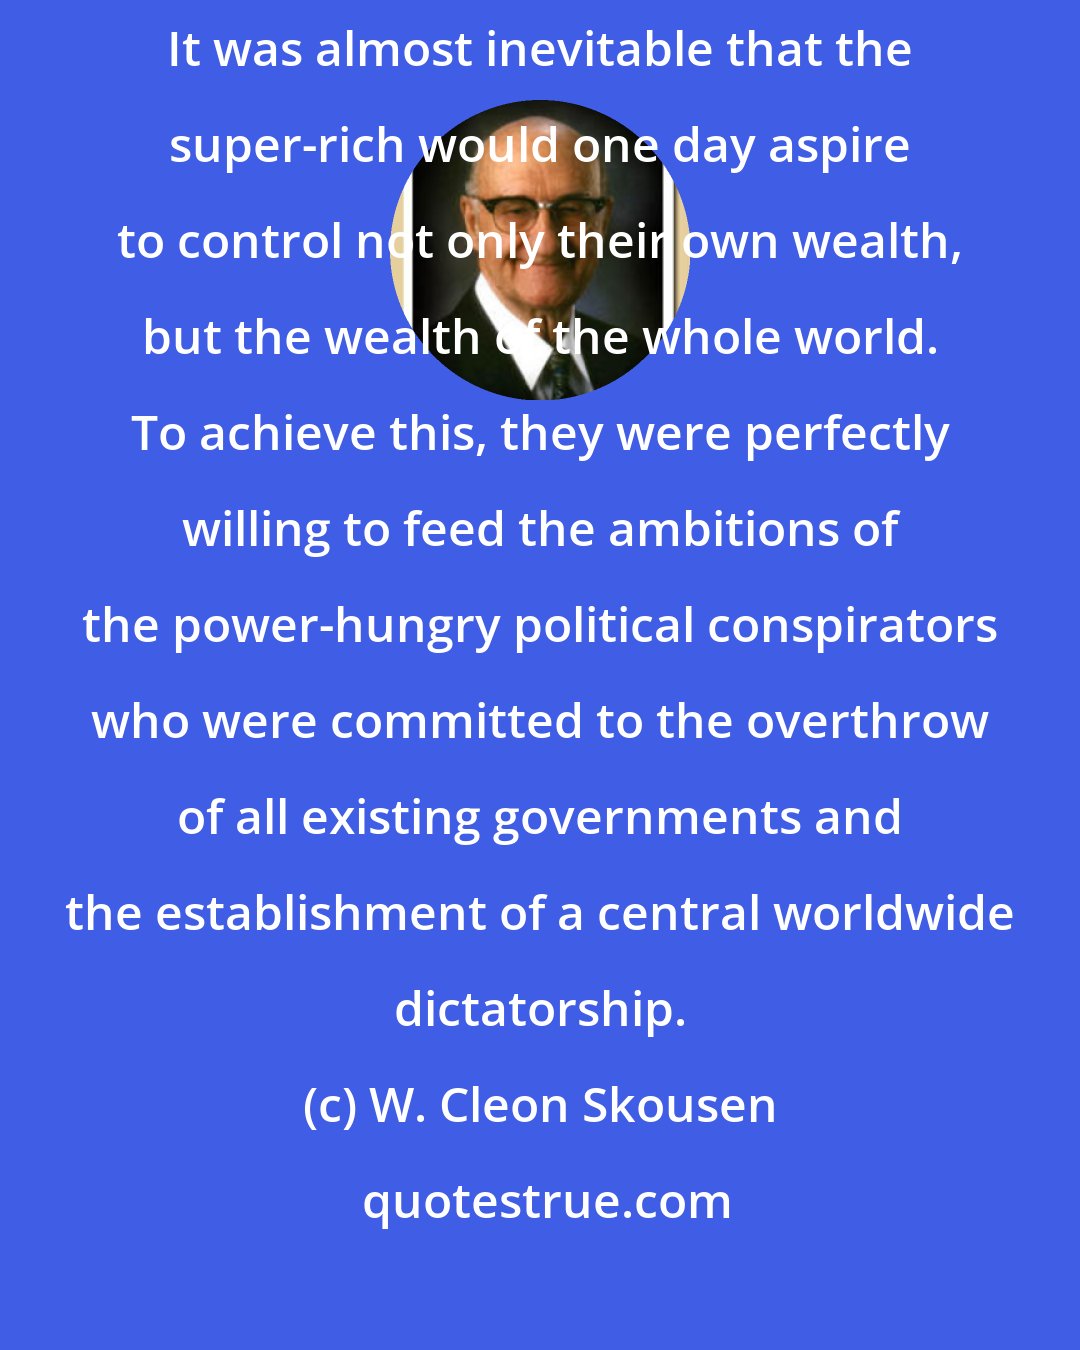 W. Cleon Skousen: Power from any source tends to create an appetite for additional power. It was almost inevitable that the super-rich would one day aspire to control not only their own wealth, but the wealth of the whole world. To achieve this, they were perfectly willing to feed the ambitions of the power-hungry political conspirators who were committed to the overthrow of all existing governments and the establishment of a central worldwide dictatorship.